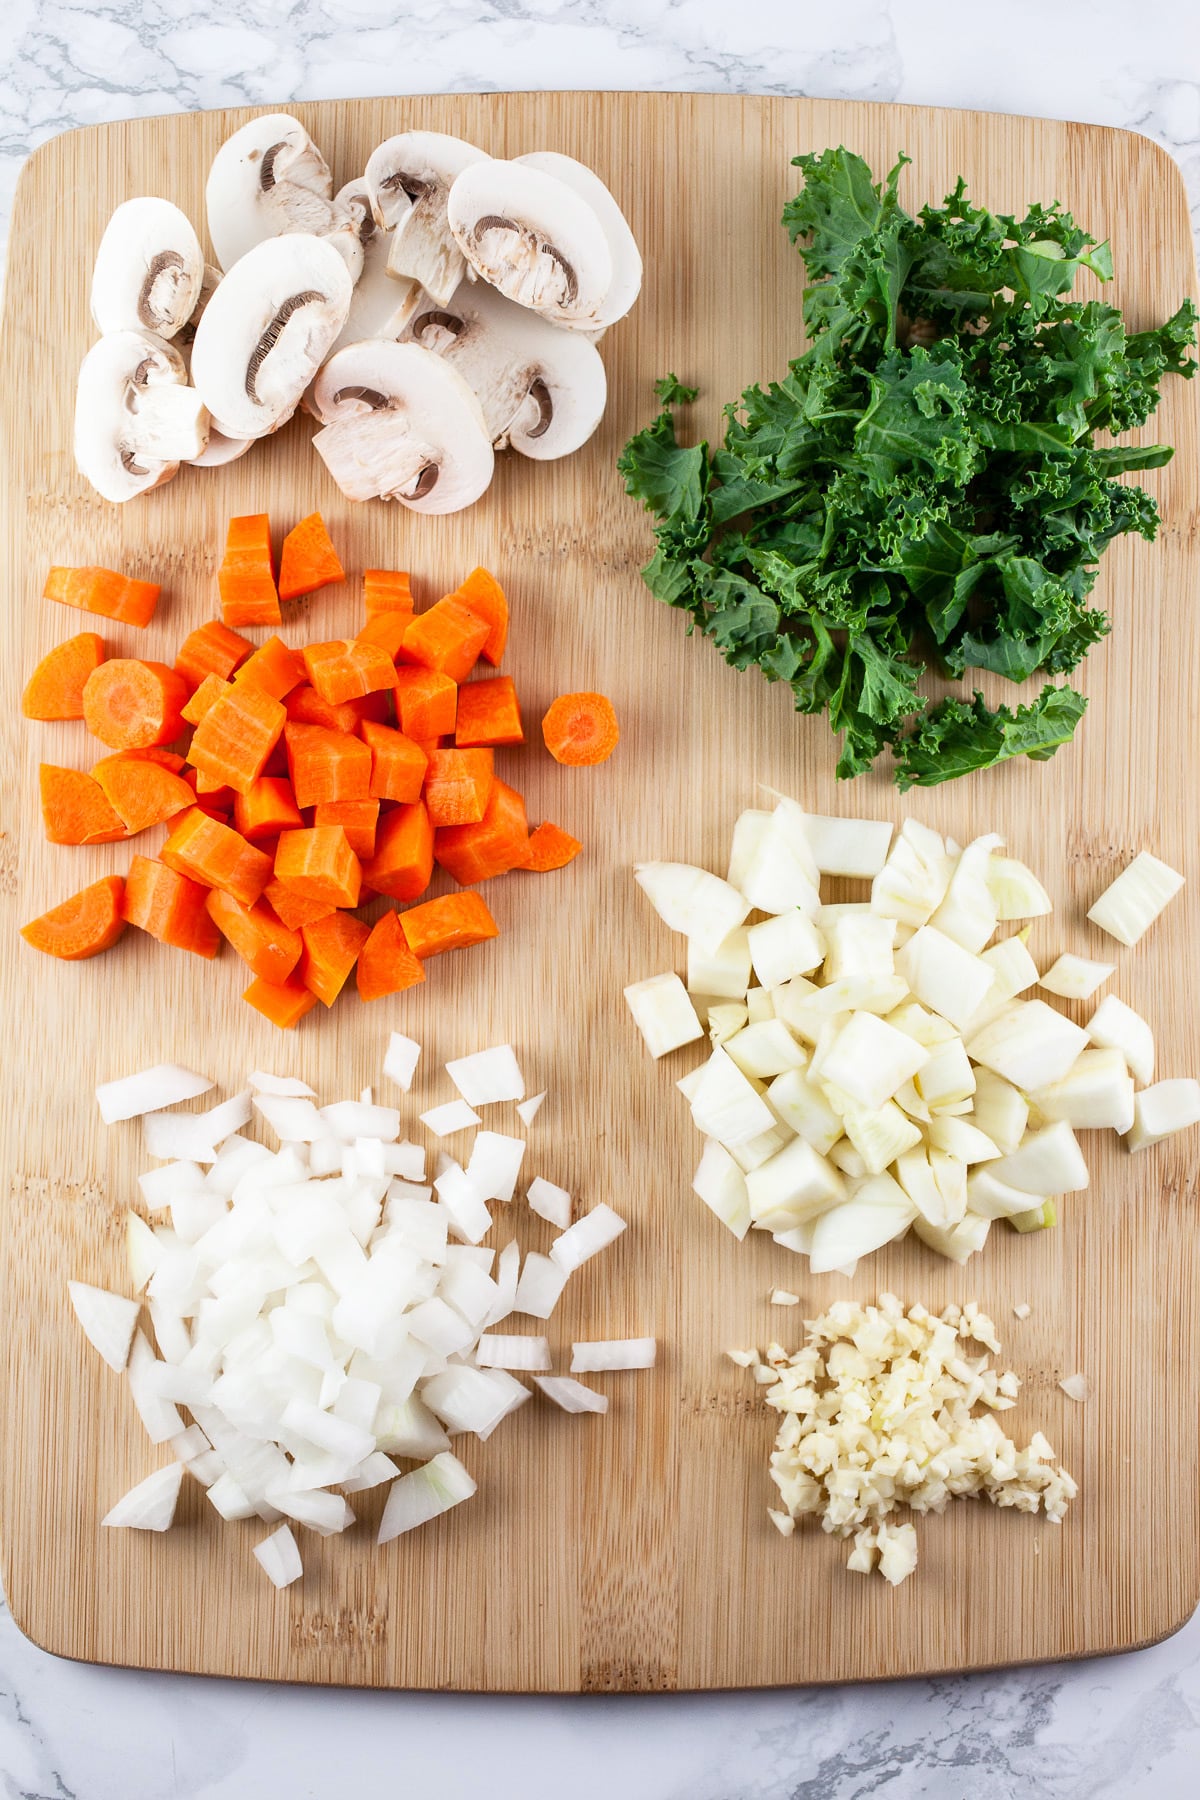 Minced garlic, onions, fennel, carrots, mushrooms, and kale on wooden cutting board.